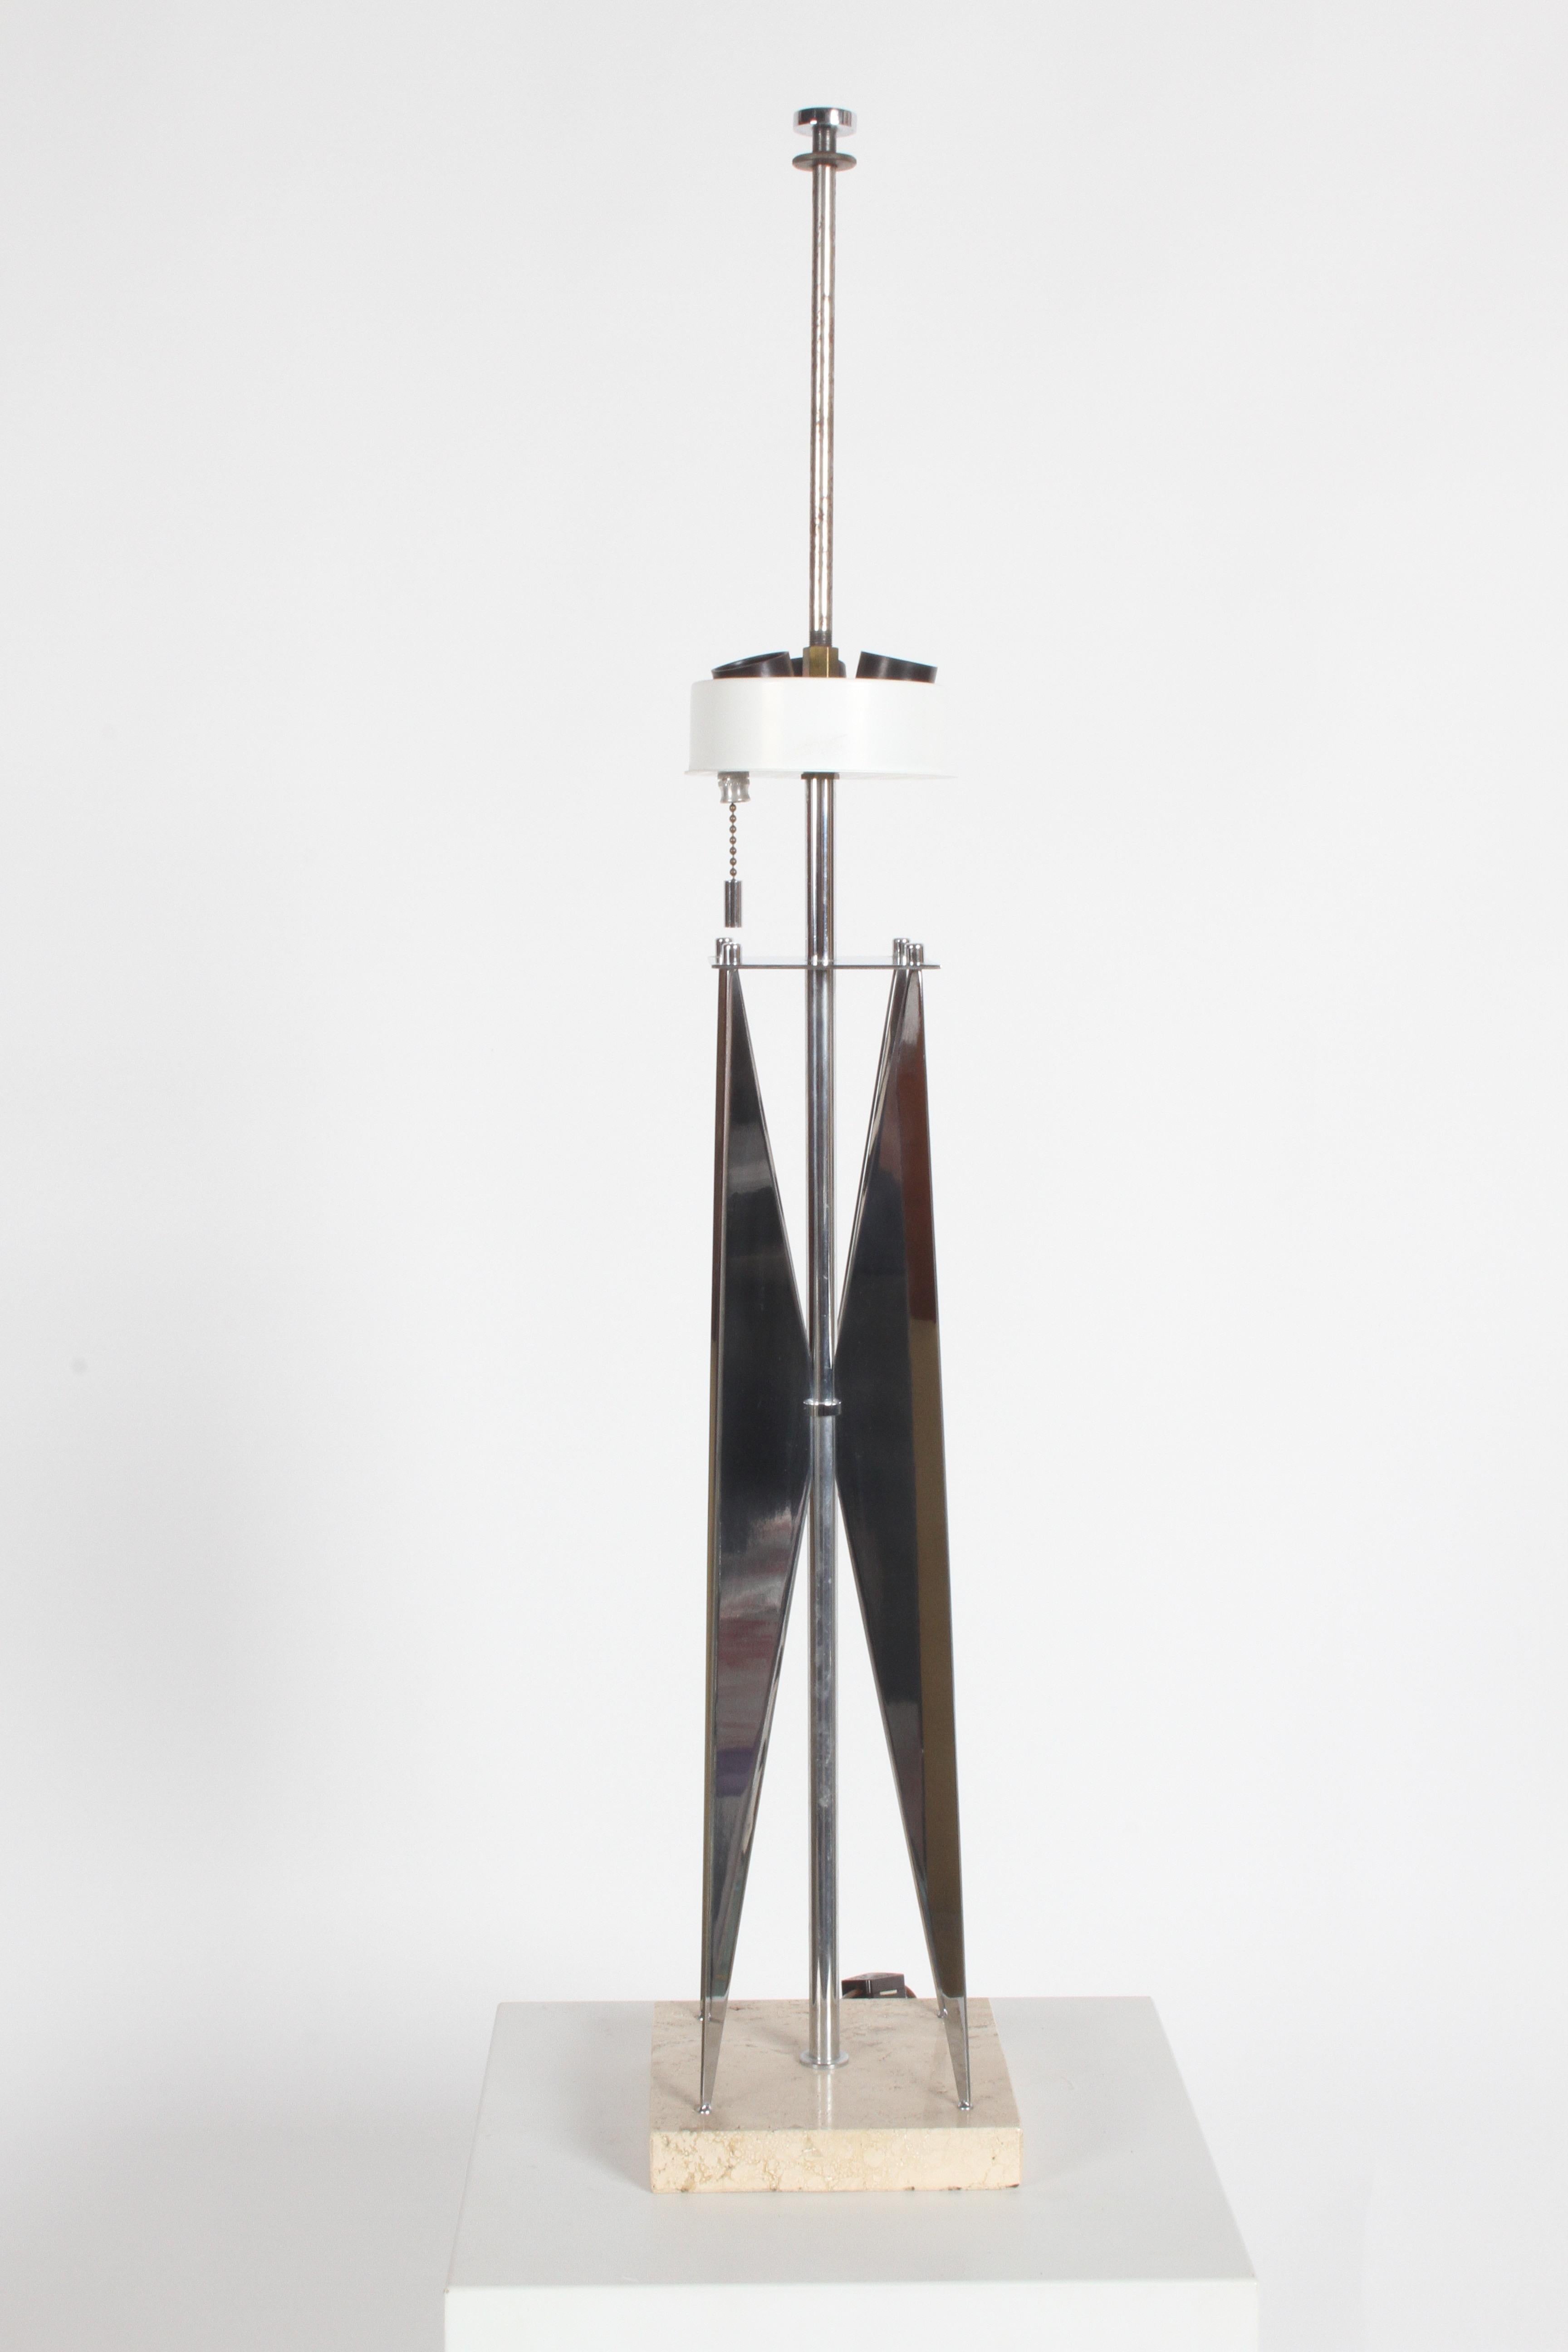 Great clean lines, sculptural and very architectural, circa 1960s Oscar Niemeyer Brasilia influenced table lamp. Chrome architectural fins on travertine base, three-light sockets, chain, plus inline switch. Sold with original shade, that does show